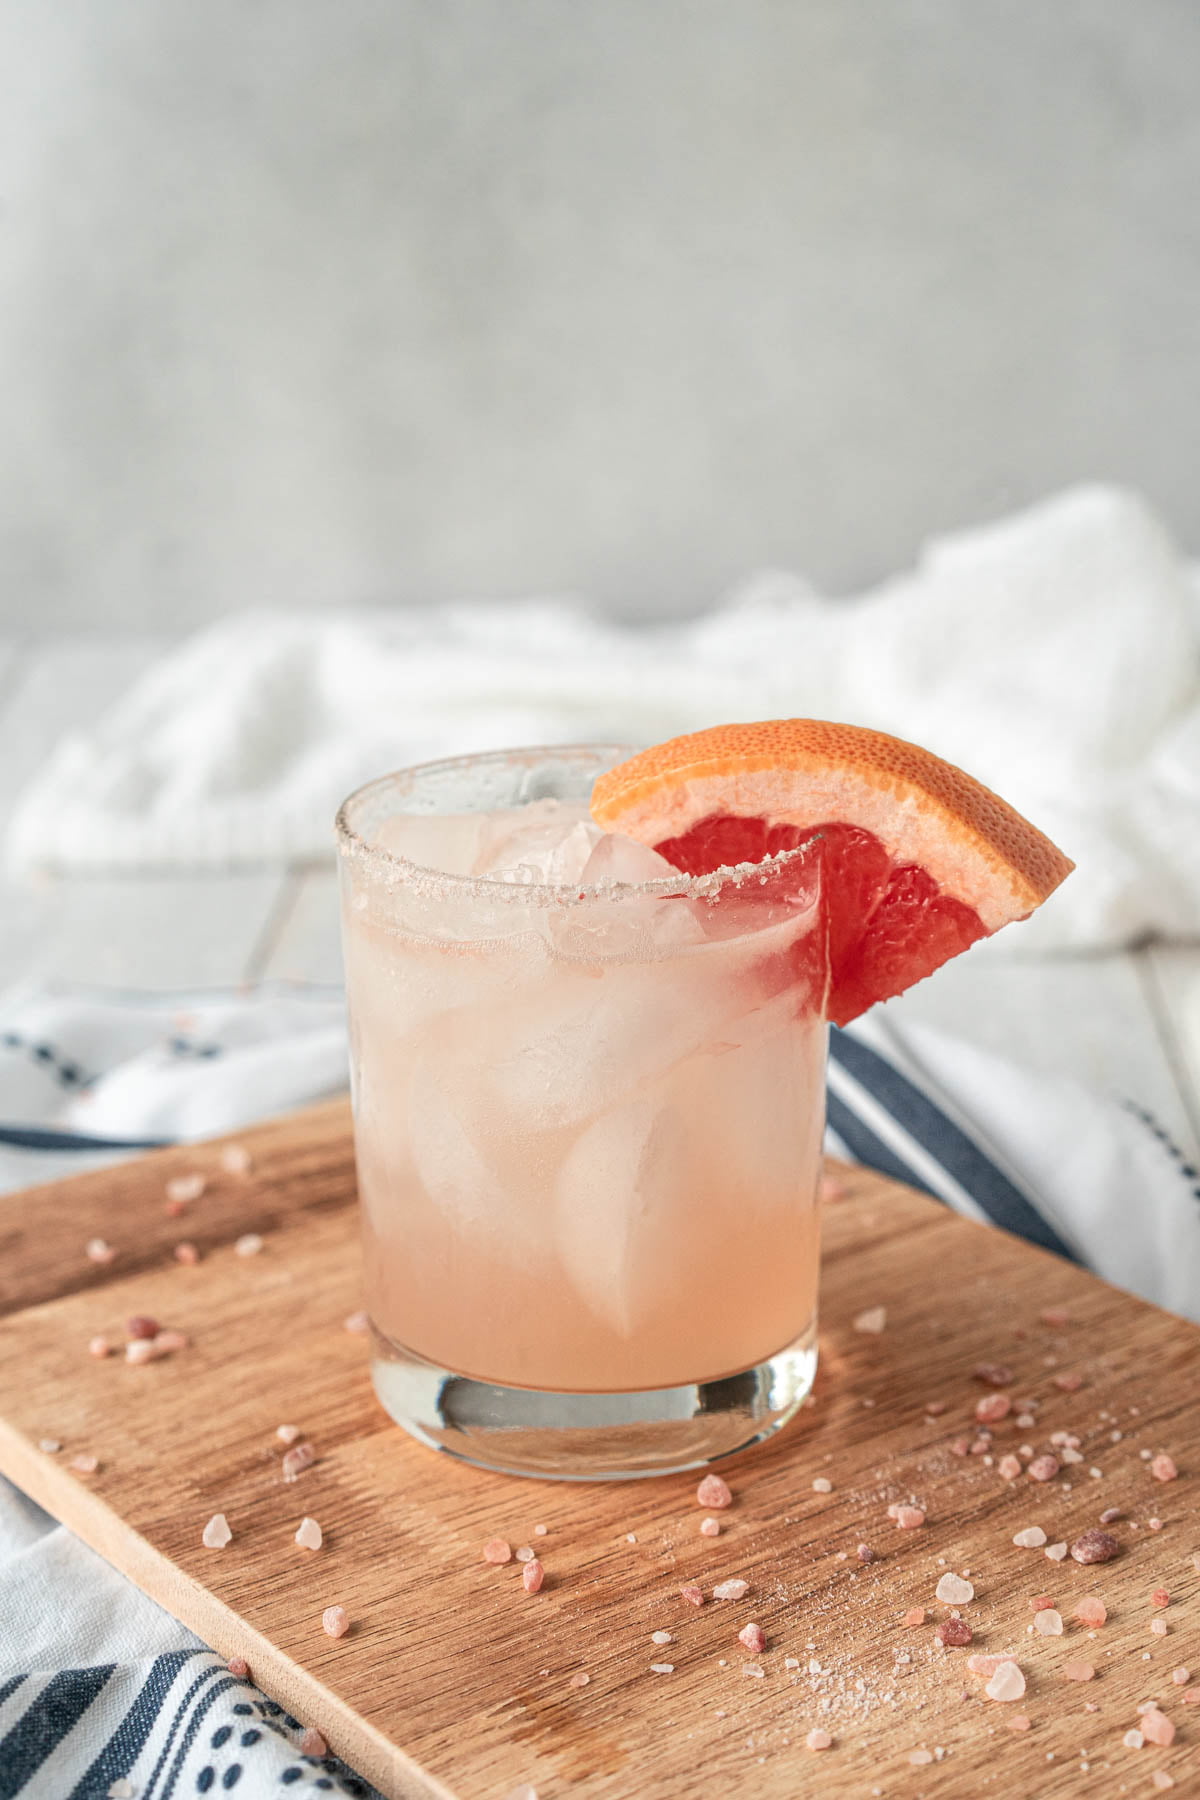 Rocks glass filled with a peach-colored drink against a grey and white background. Rim of the glass is garnished with pink salt and a grapefruit wedge. Glass is sitting on a wooden cutting board with pink salt crystals scattered across it.